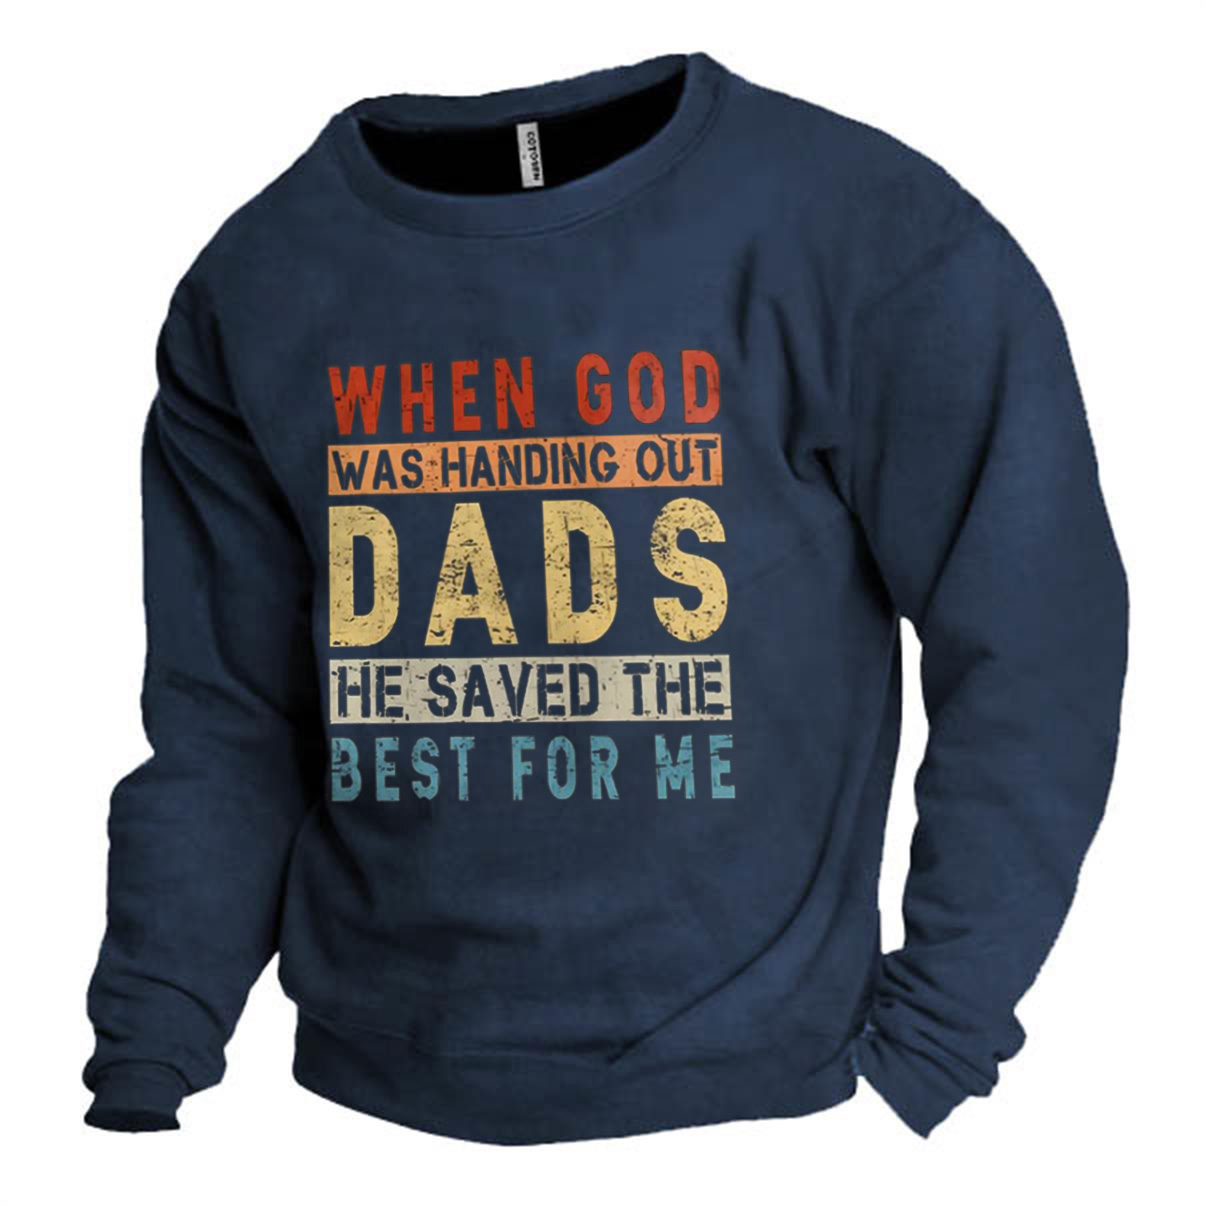 Men's When God Was Chic Handing Out Dads He Saved The Best For Me Print Sweatshirt